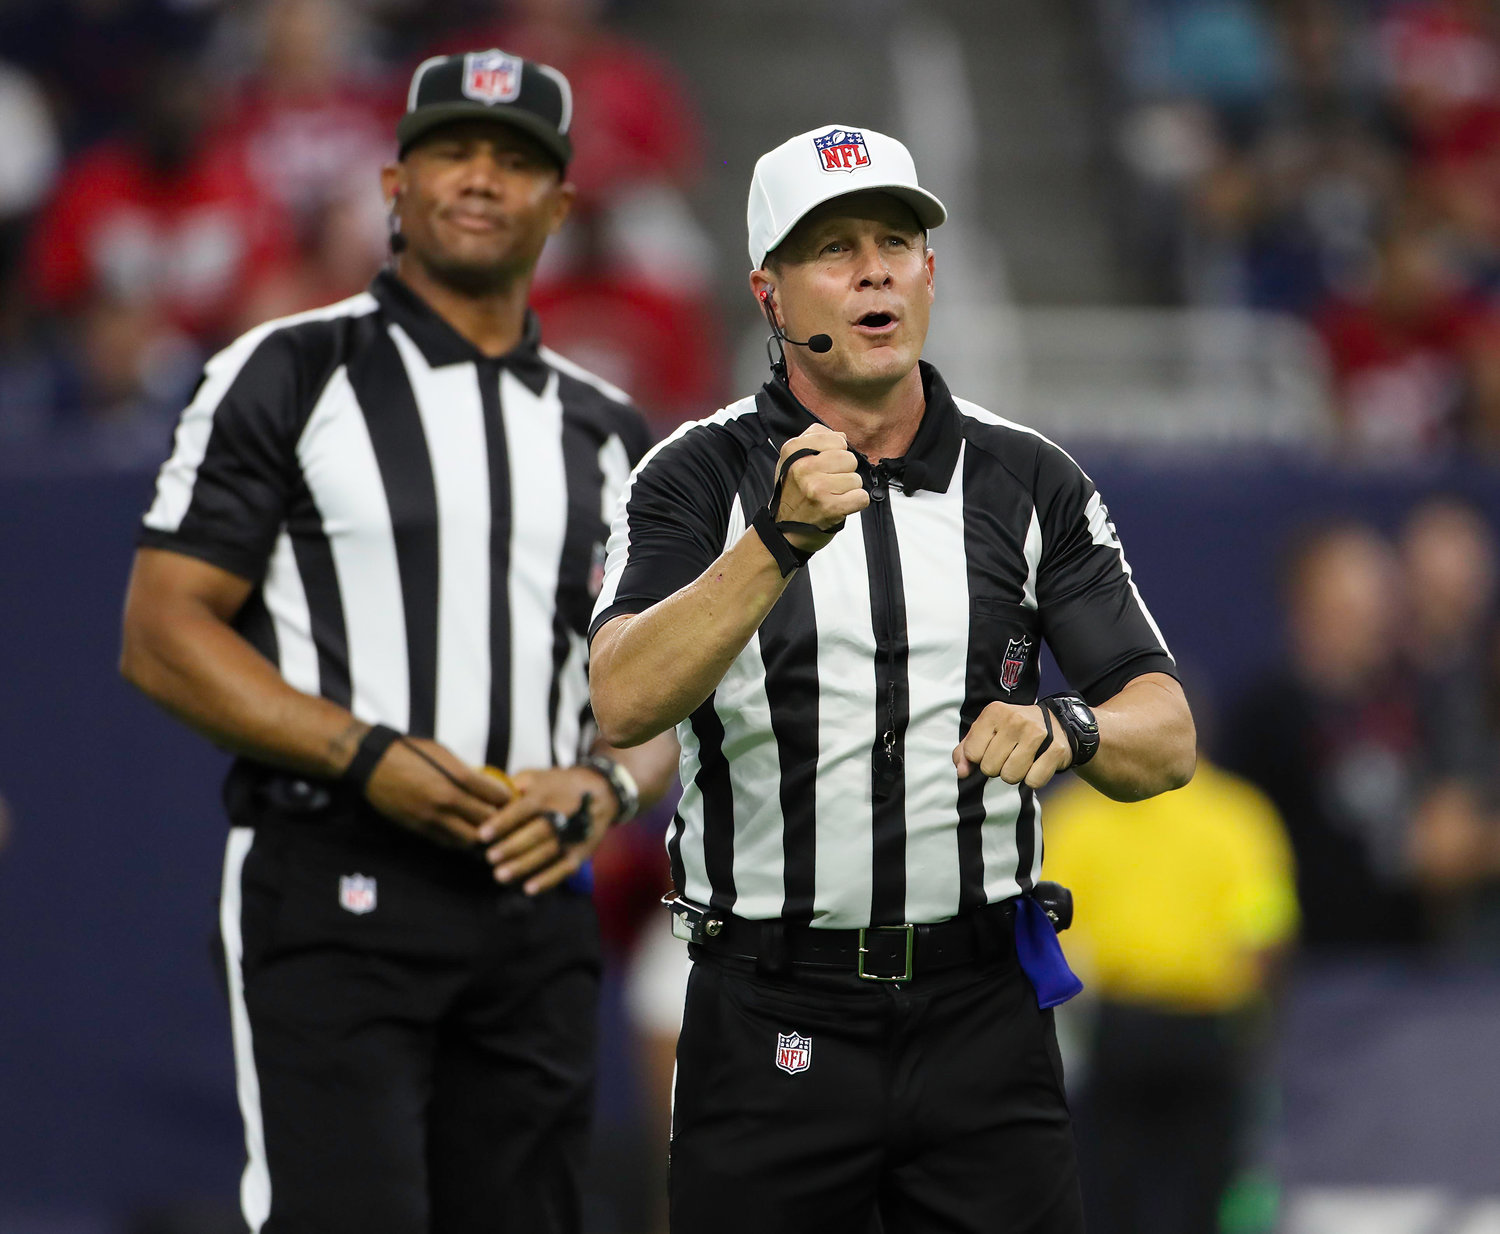 Referee Shawn Hochuli (83) signals a rouging the passer penalty against the San Francisco 49ers during an NFL preseason game between the Texans and the 49ers in Houston, Texas, on August 25, 2022.